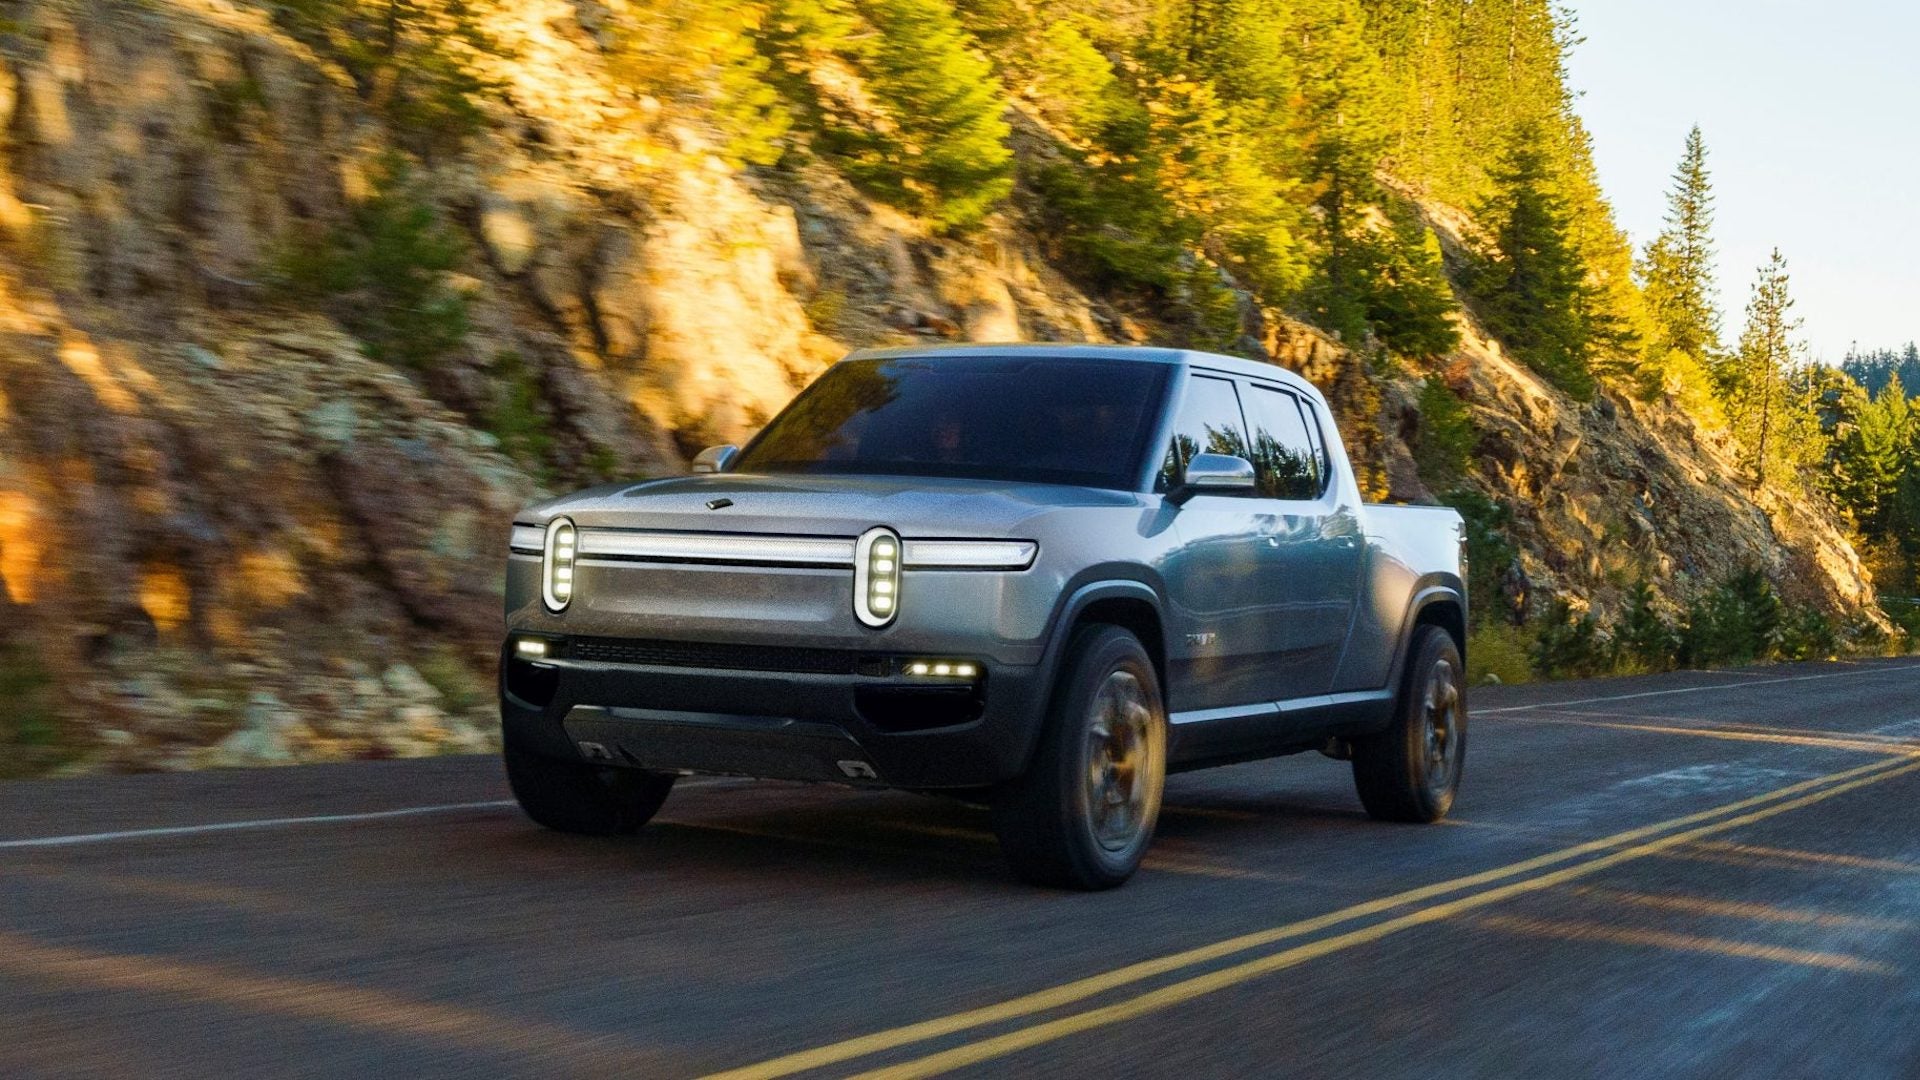 Rivian R1T Aims to Be First Mass-Produced, Off-Road Electric Pickup Truck